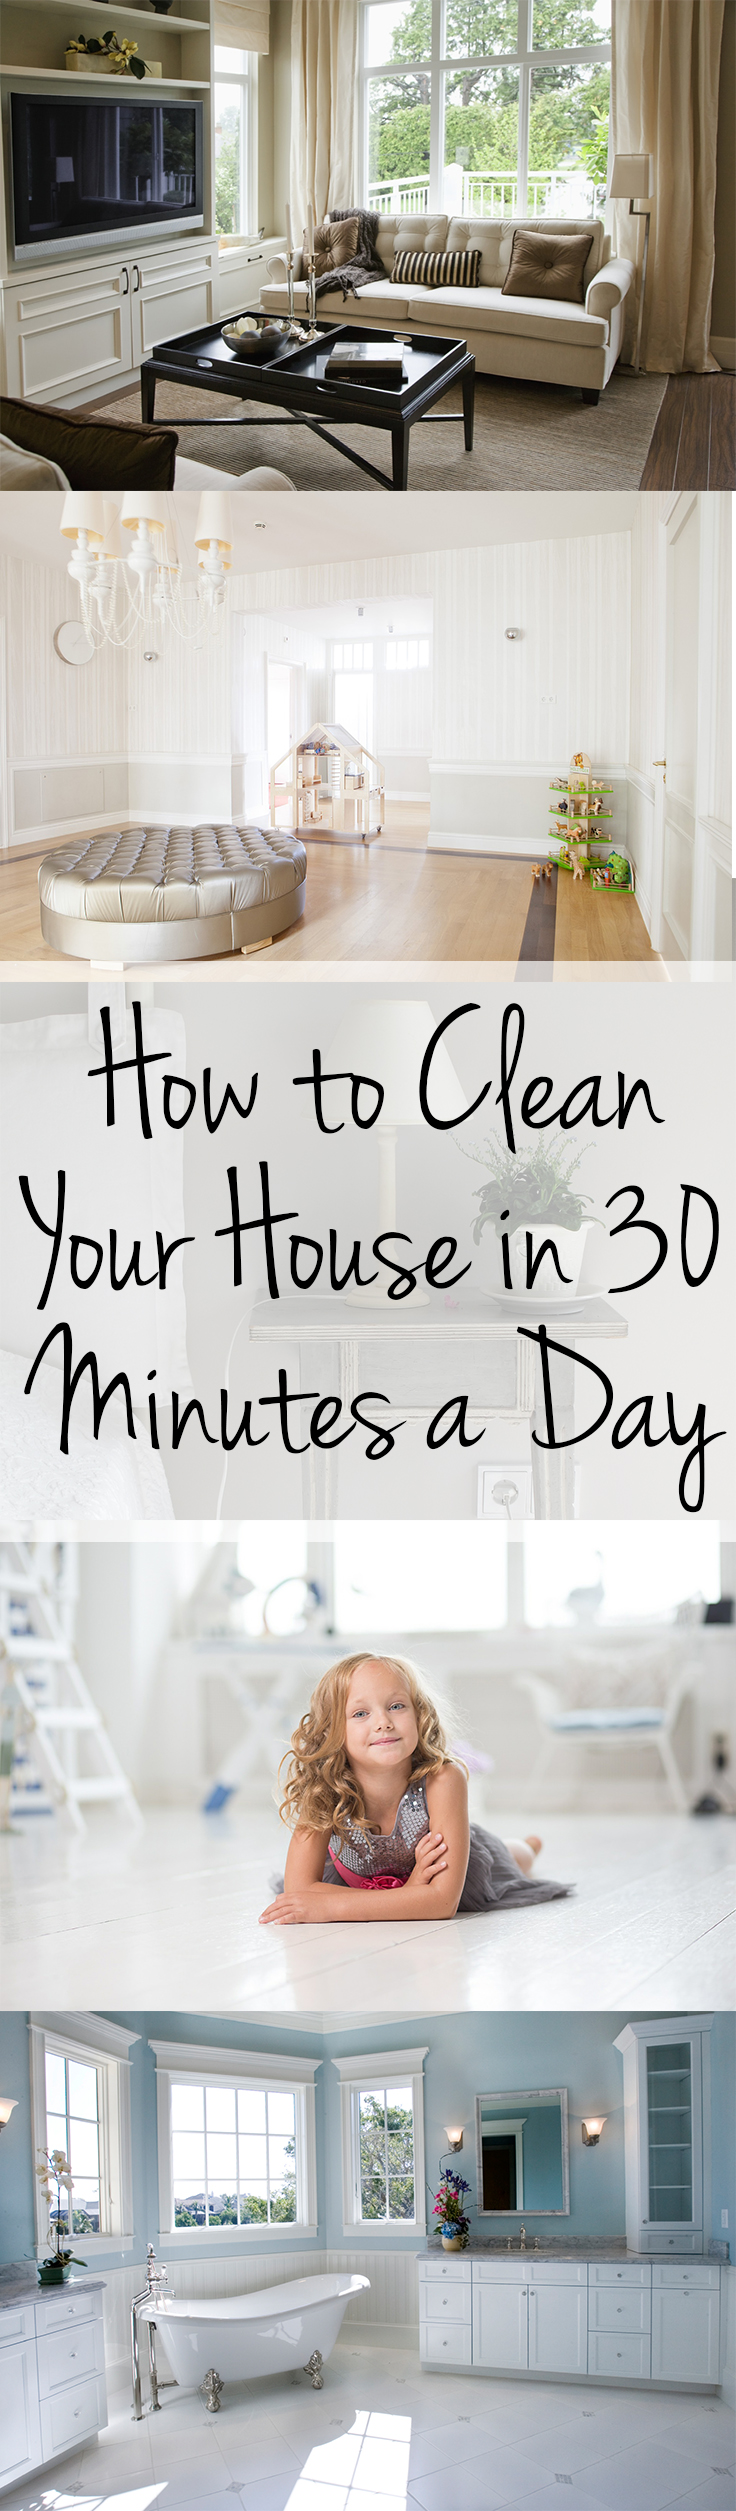 Cleaning, clean house, cleaning tips, cleaning hacks, popular pin, DIY cleaning, home cleaning, clutter free life, clutter free living hacks.